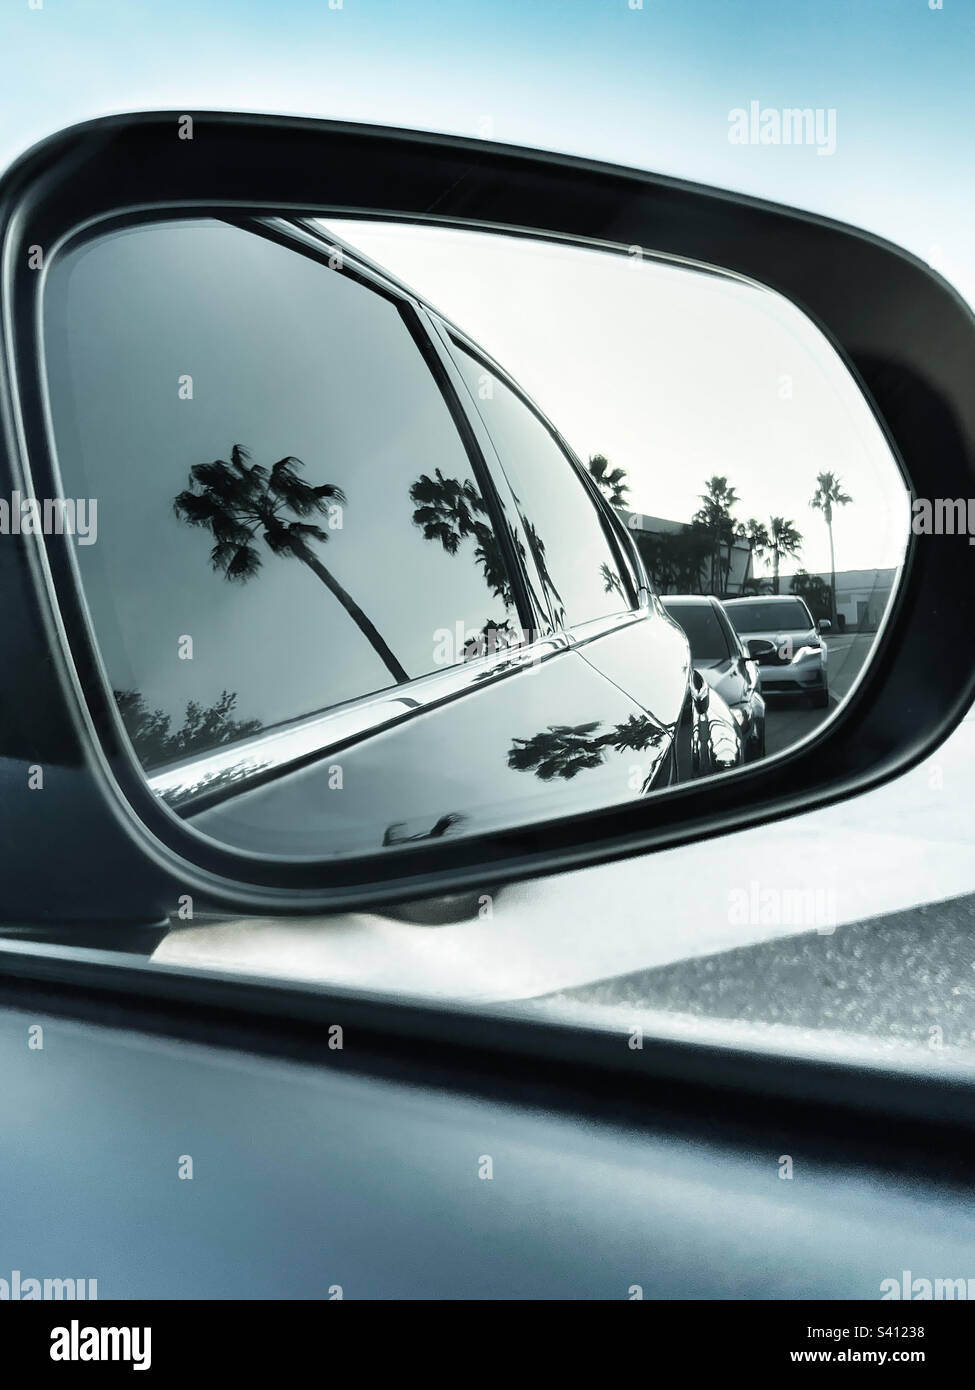 Palm tree reflection in car rear view mirror Stock Photo